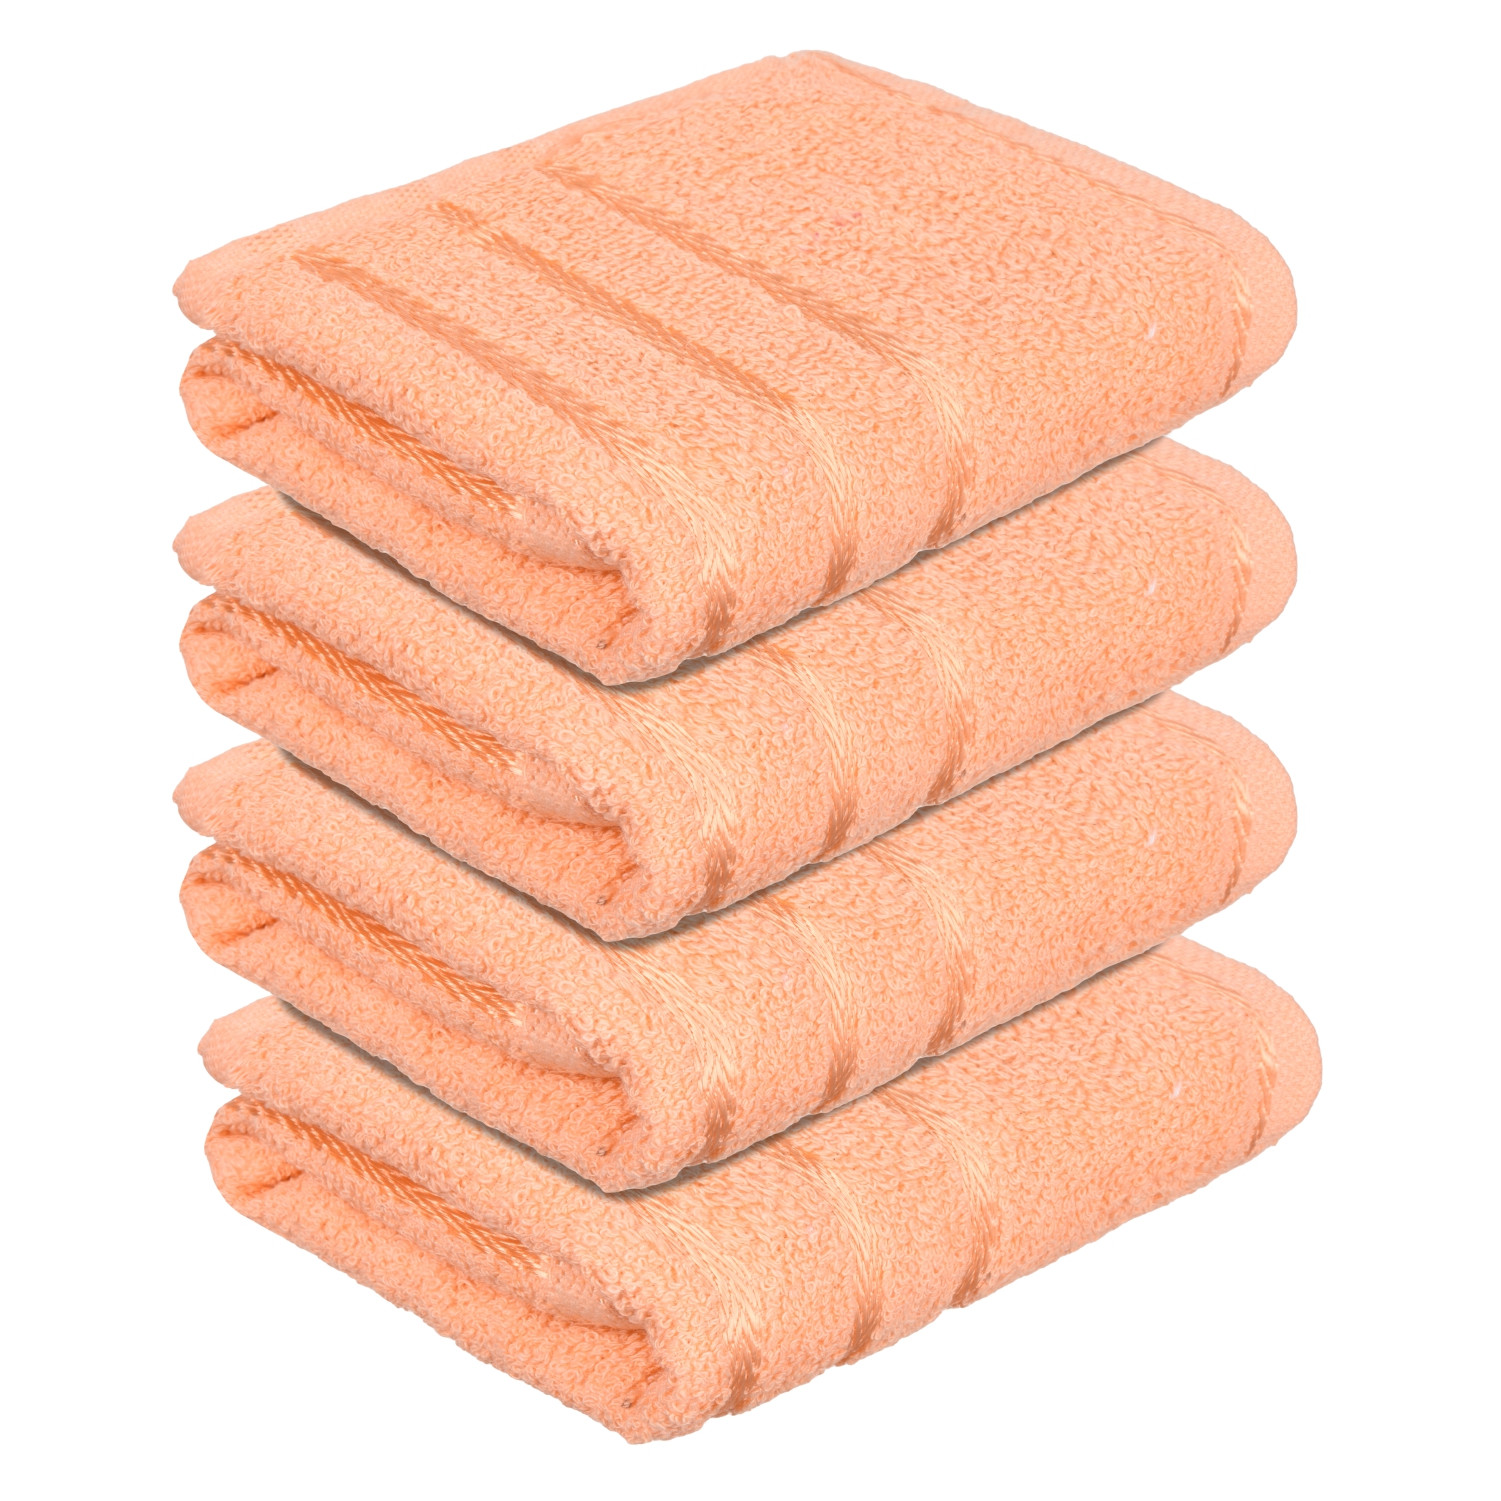 Kuber Industries Face Towel | Towels for Facewash | Towels for Gym | Facewash for Travel | Towels for Daily use | Workout Hand Towel | Lining Design | 14x21 Inch |Peach